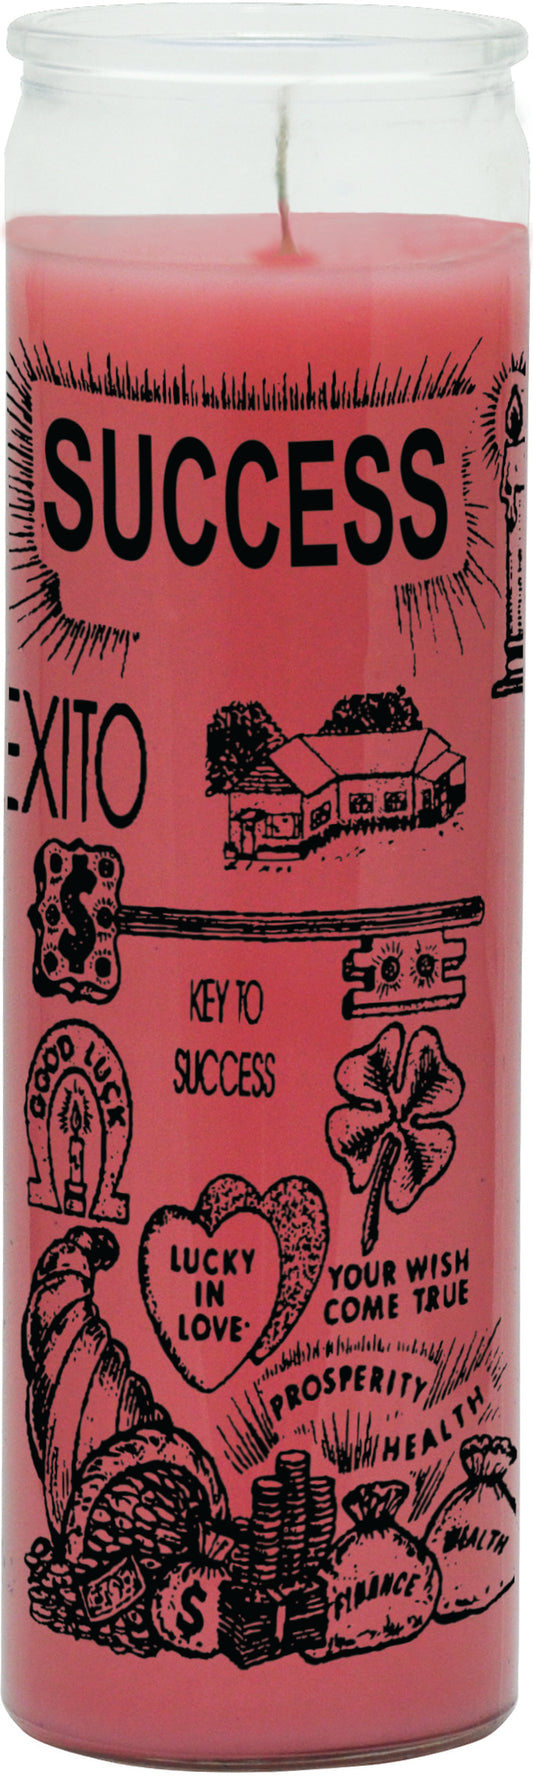 SUCCESS PINK-7 DAY SCREEN PRINTED CANDLE